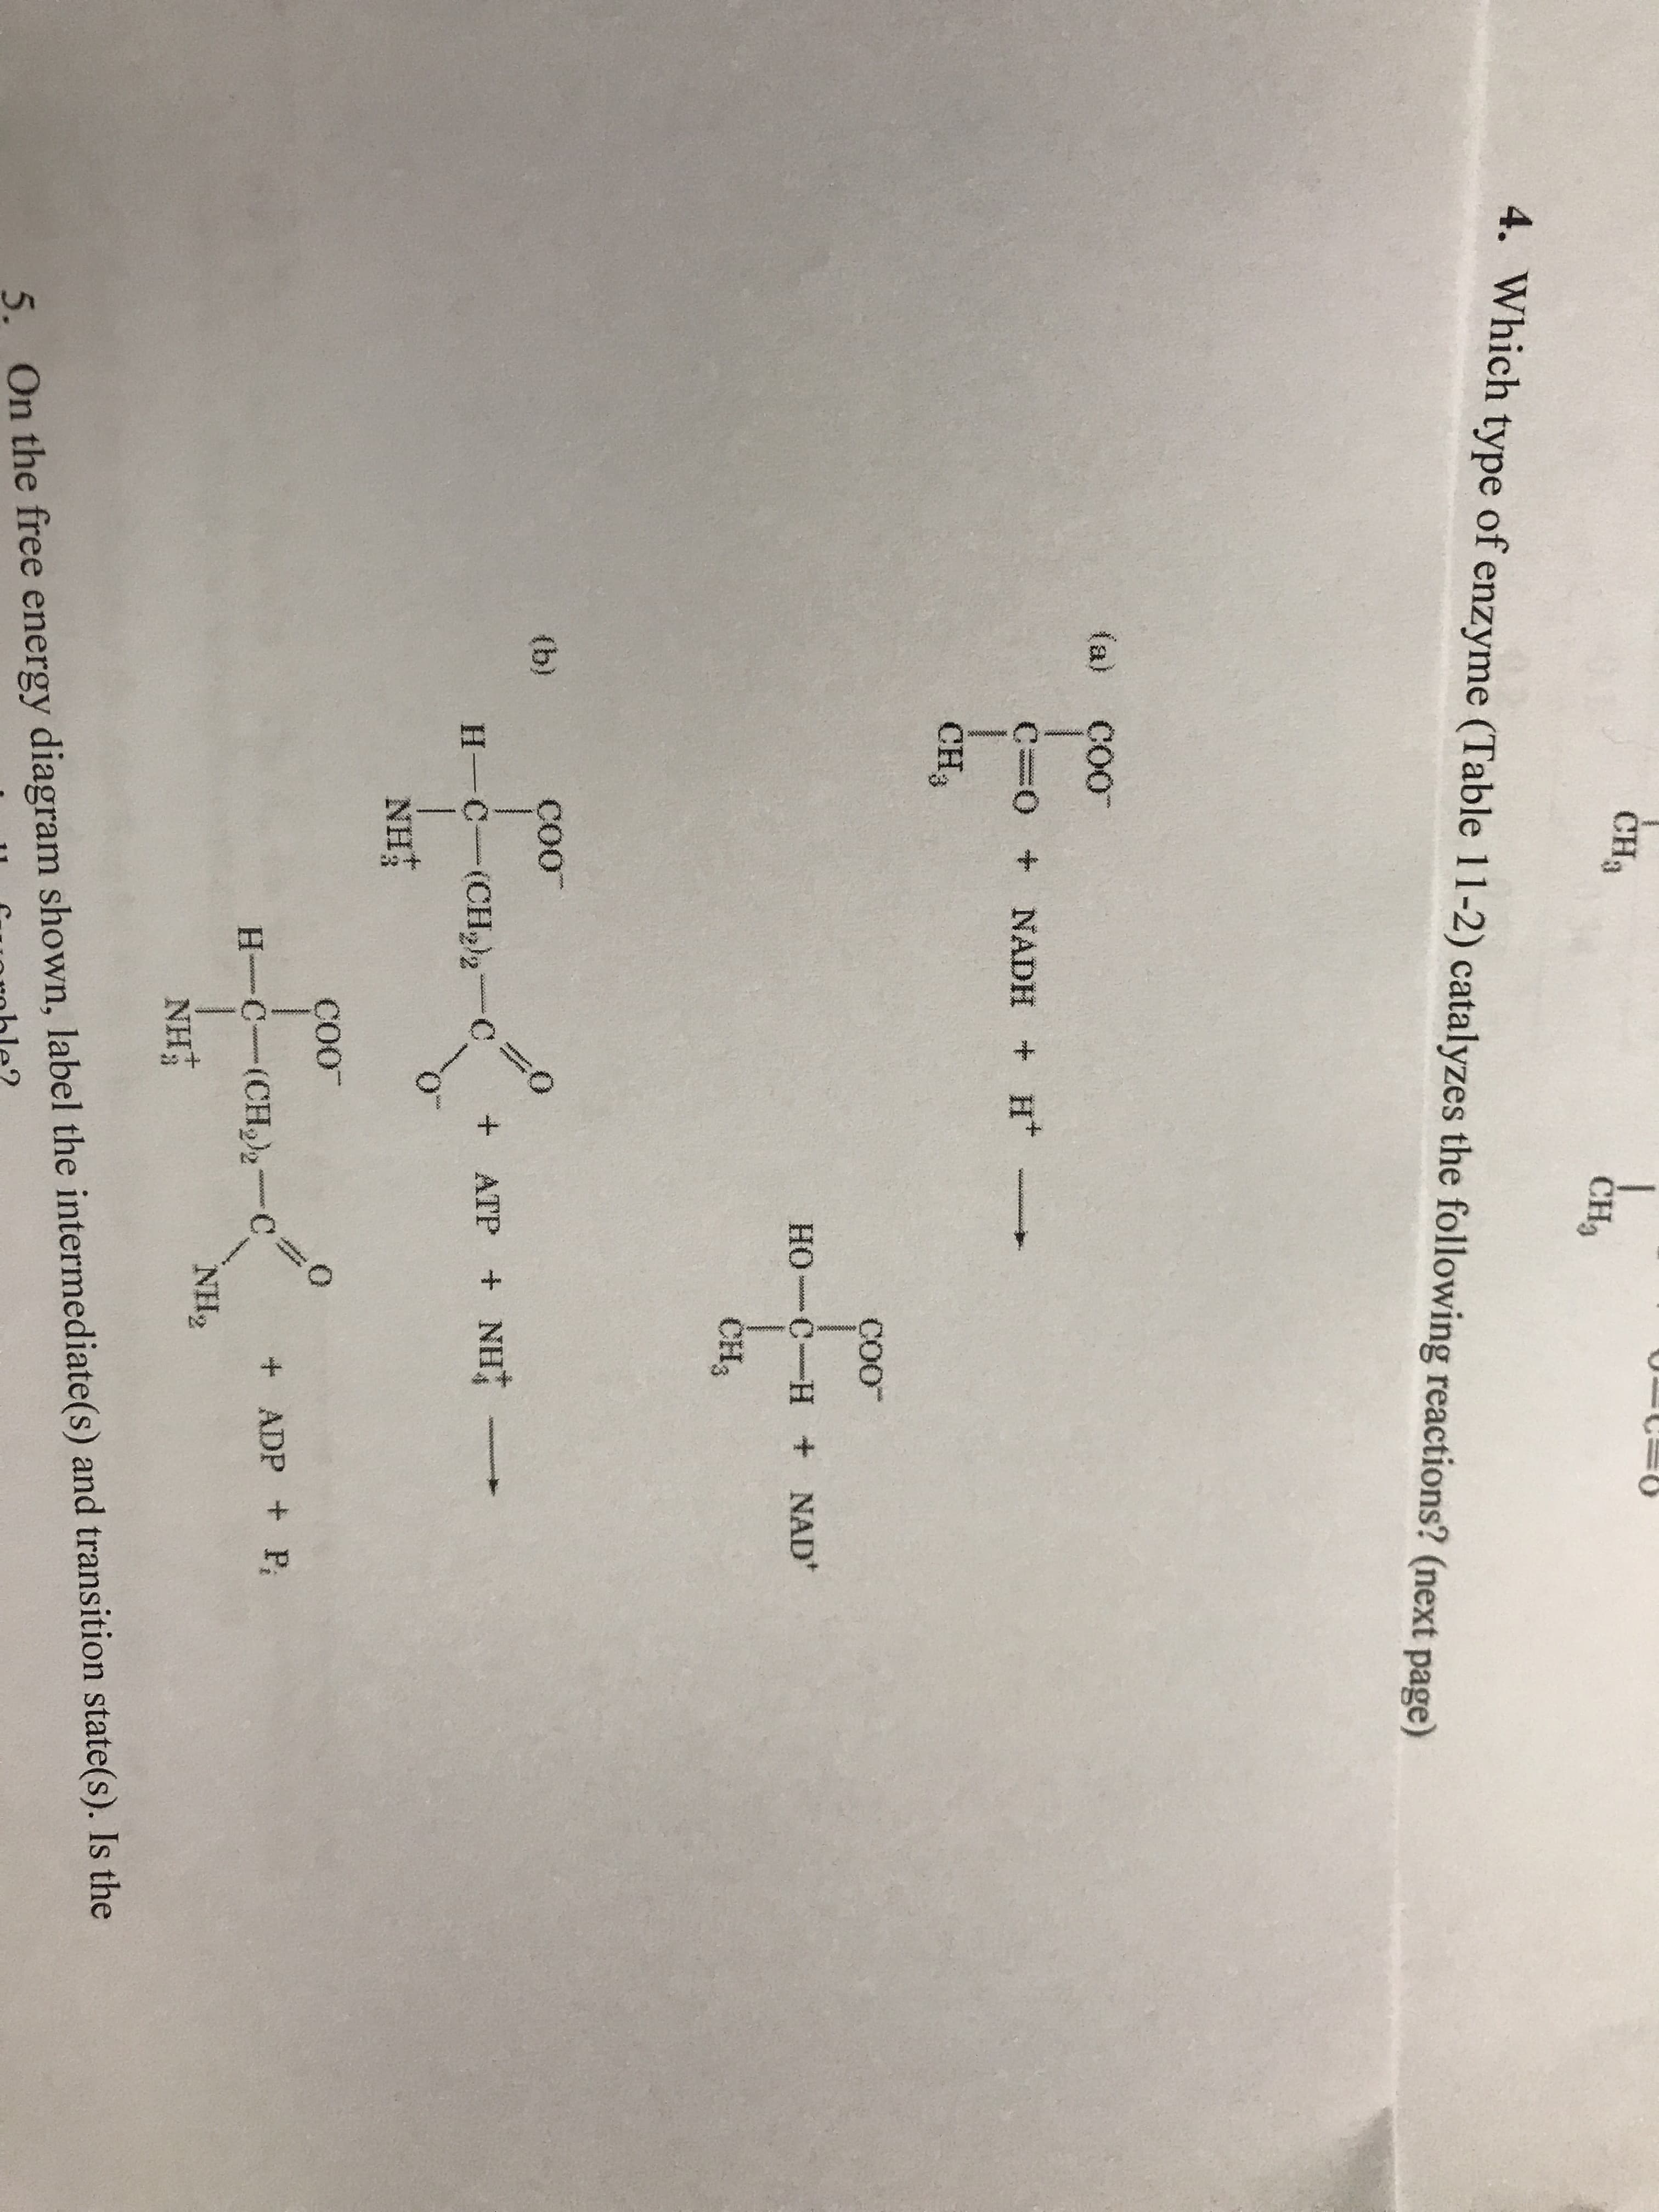 CHa
CH
4. Which type of enzyme (Table 11-2) catalyzes the following reactions? (next page)
(a) Co0
C=O + NADH + H+-
CH3
Coo
HH NAD
CH3
coo
ΝΗ
Coo
+ADP P
NH2
NHİ
5. On the free energy diagram shown, label the intermediate(s) and transition state(s). Is the
ble?
